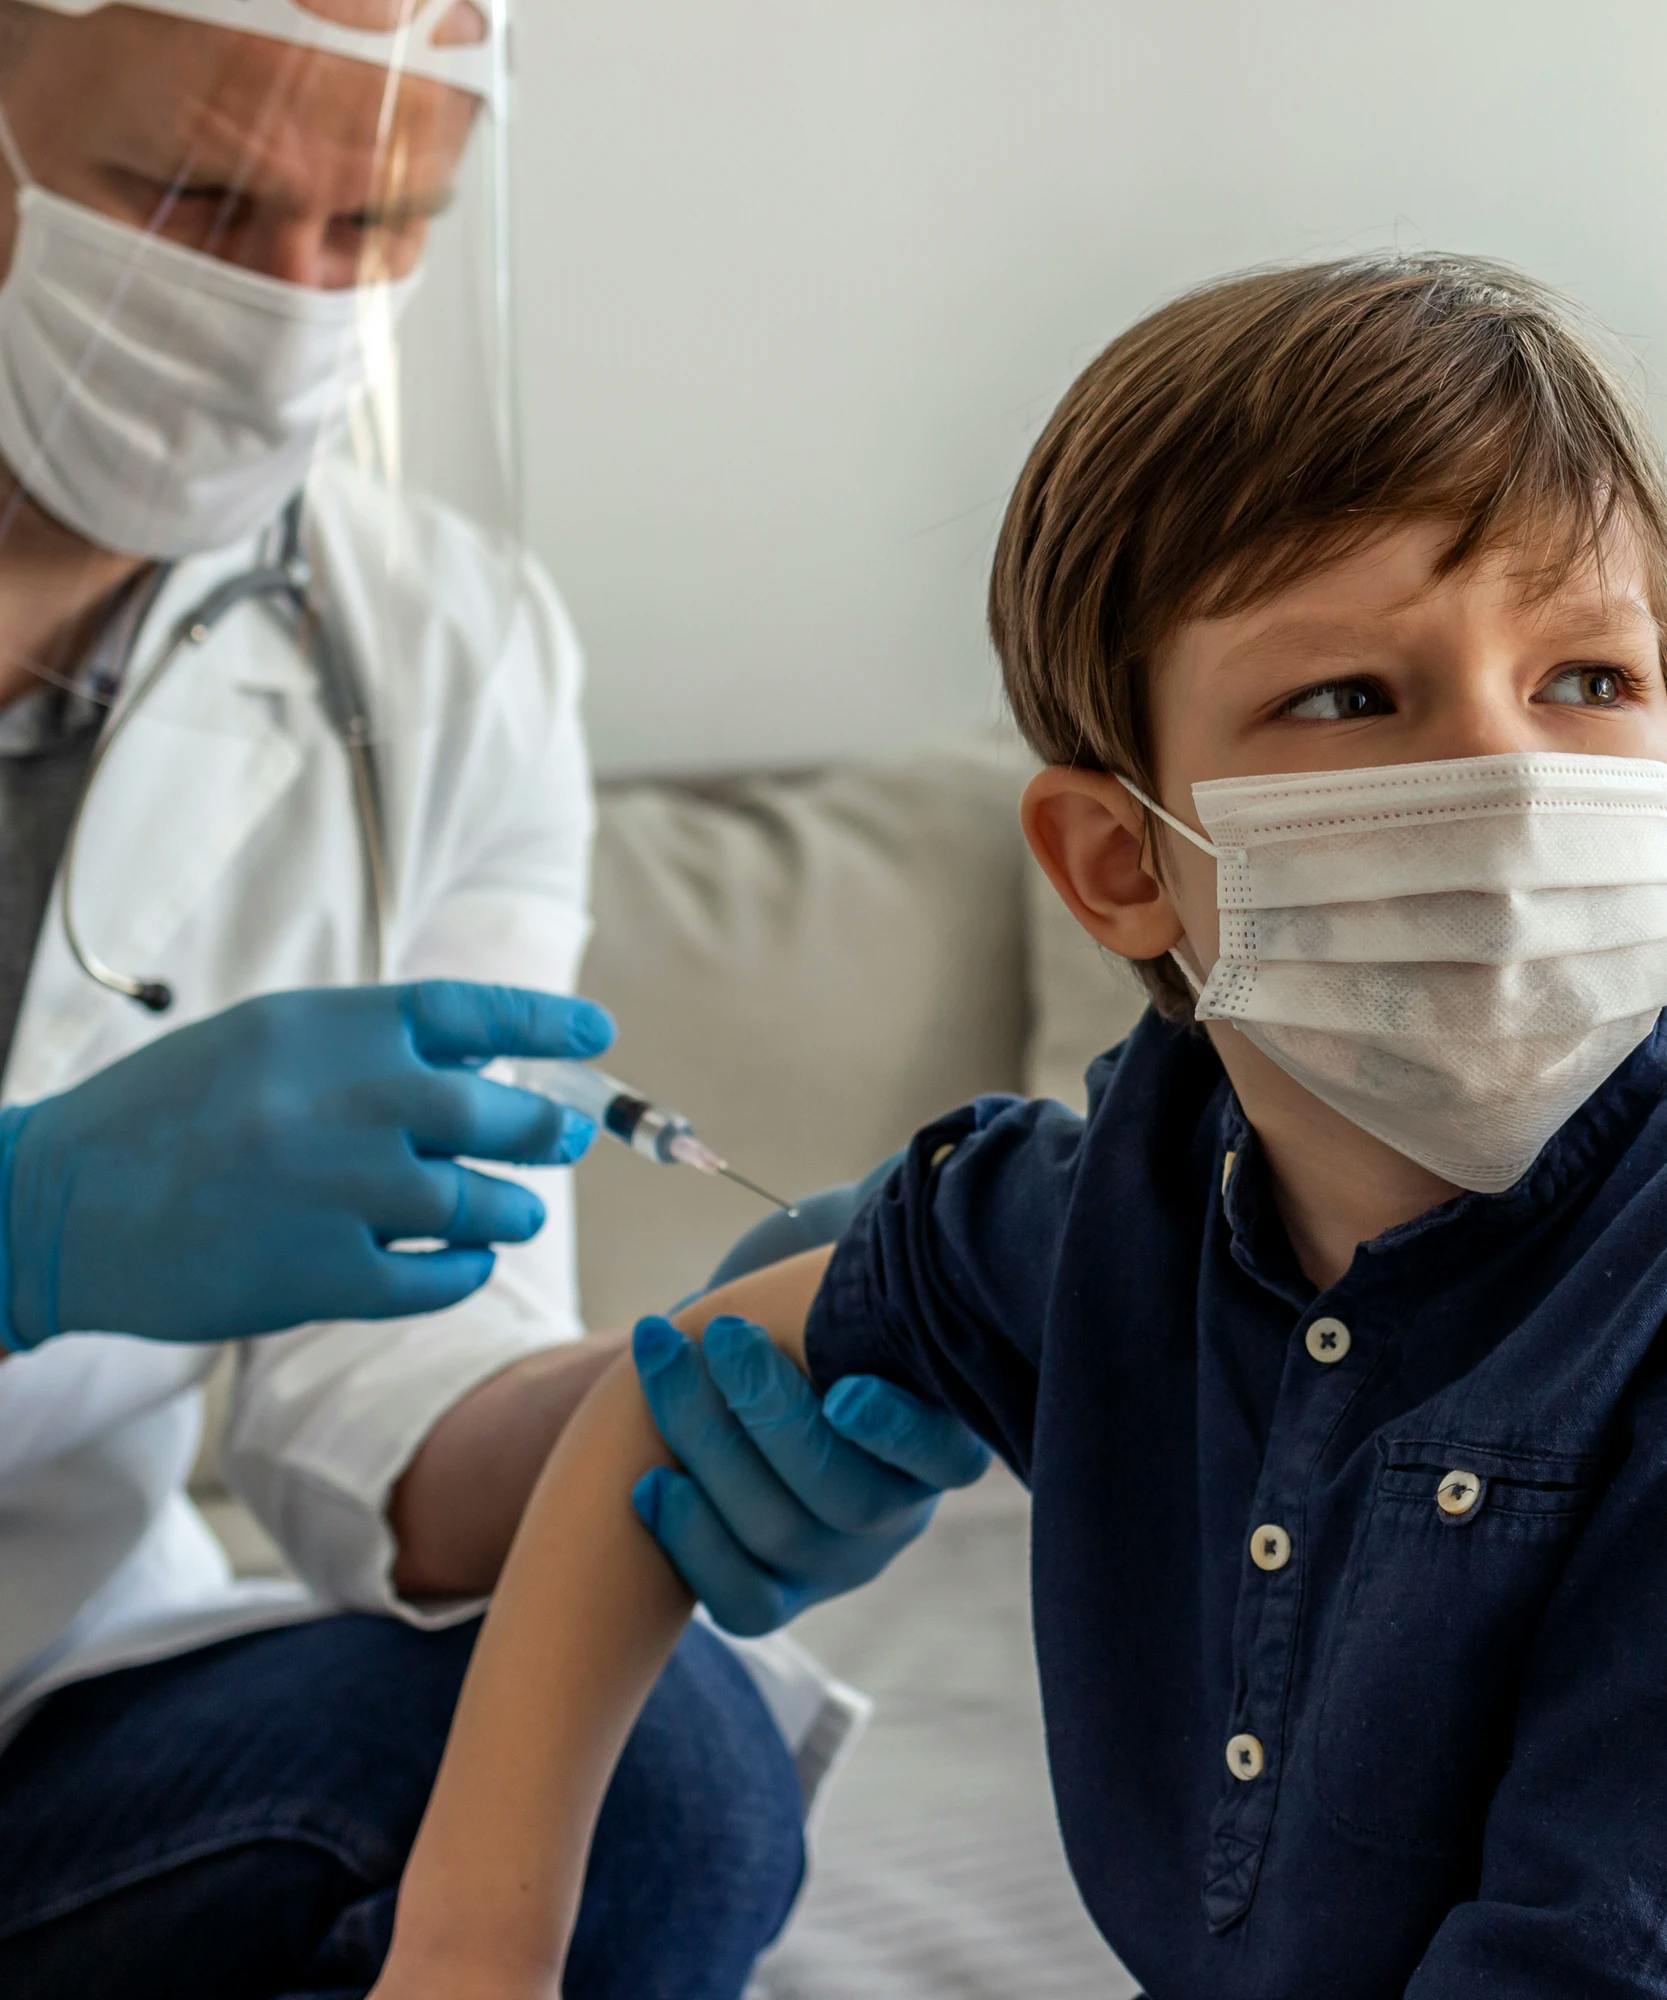 shutterstock The White House Is Aiming Covid-19 Vaccine Coercion At Children